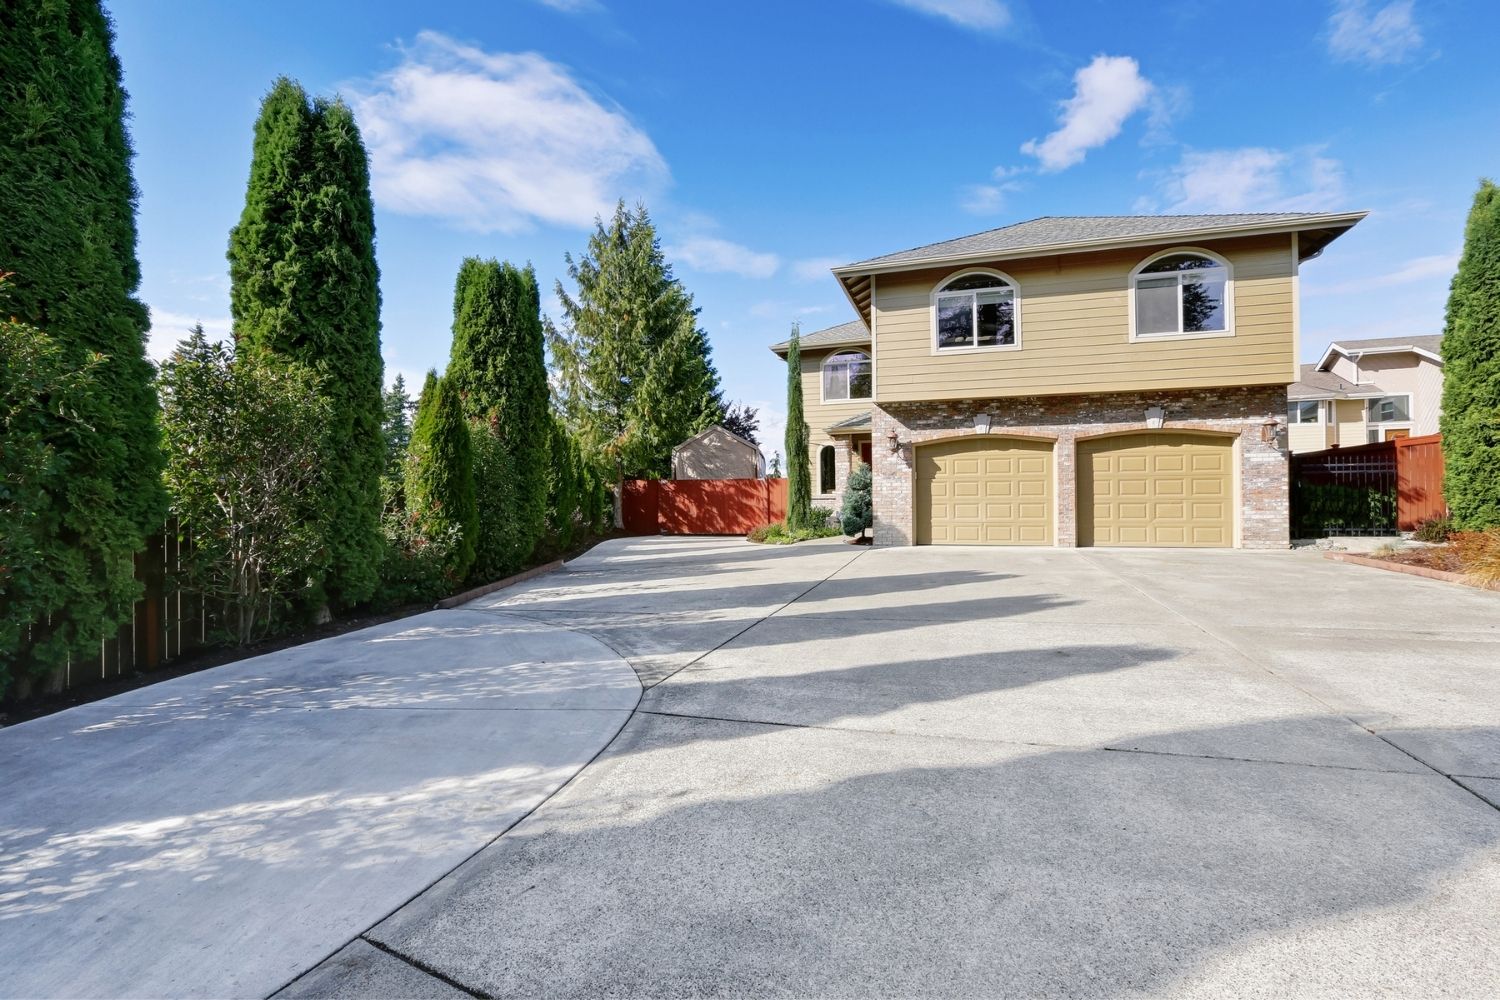 How Much Does It Cost To Build A Driveway